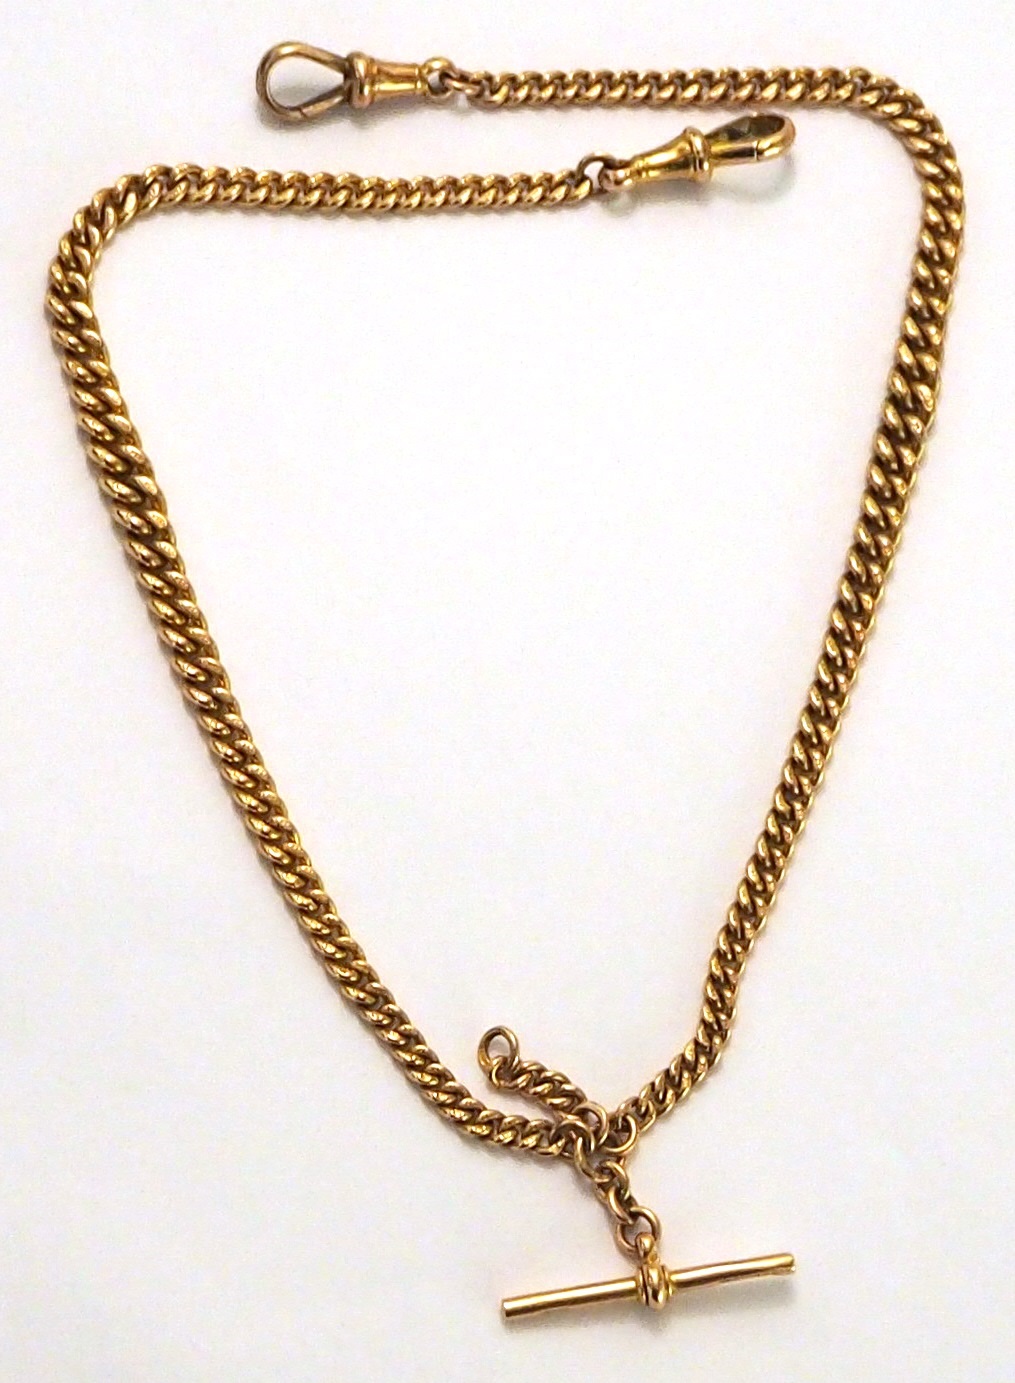 Albert chain with dog clip clasp by Ashley Zhang | Finematter